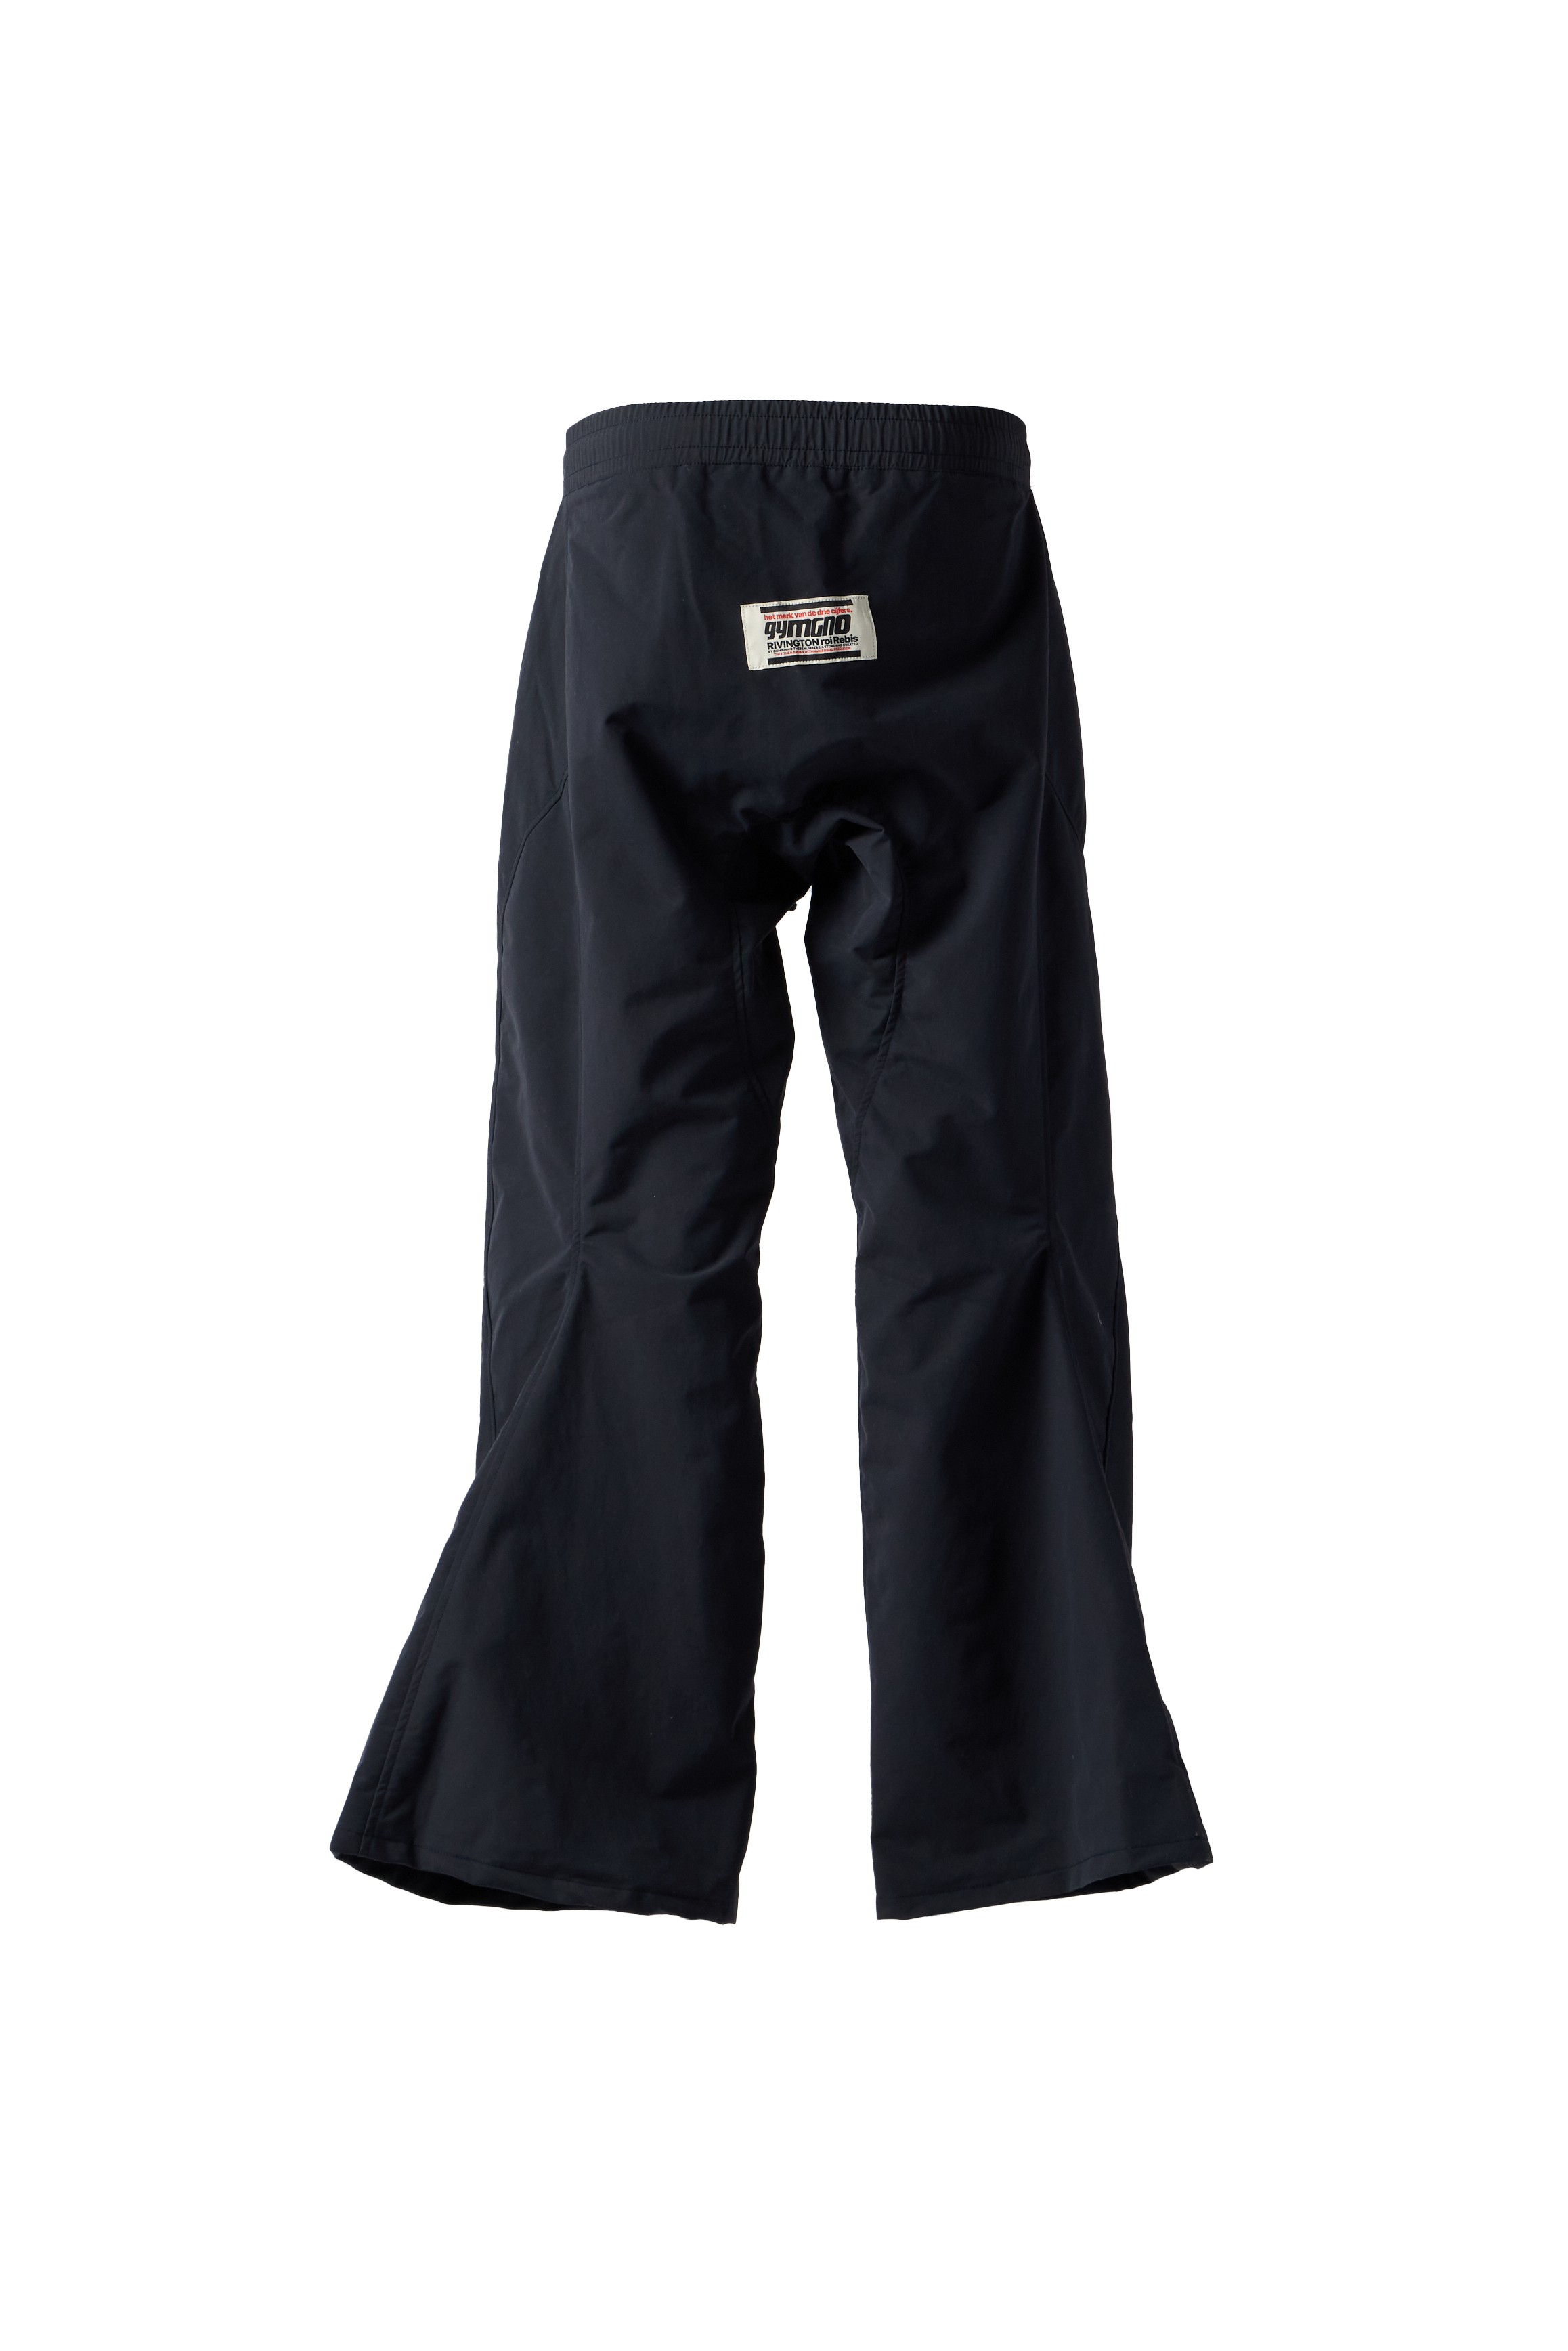 RRR123 - Magi Pants Of Articulation product image